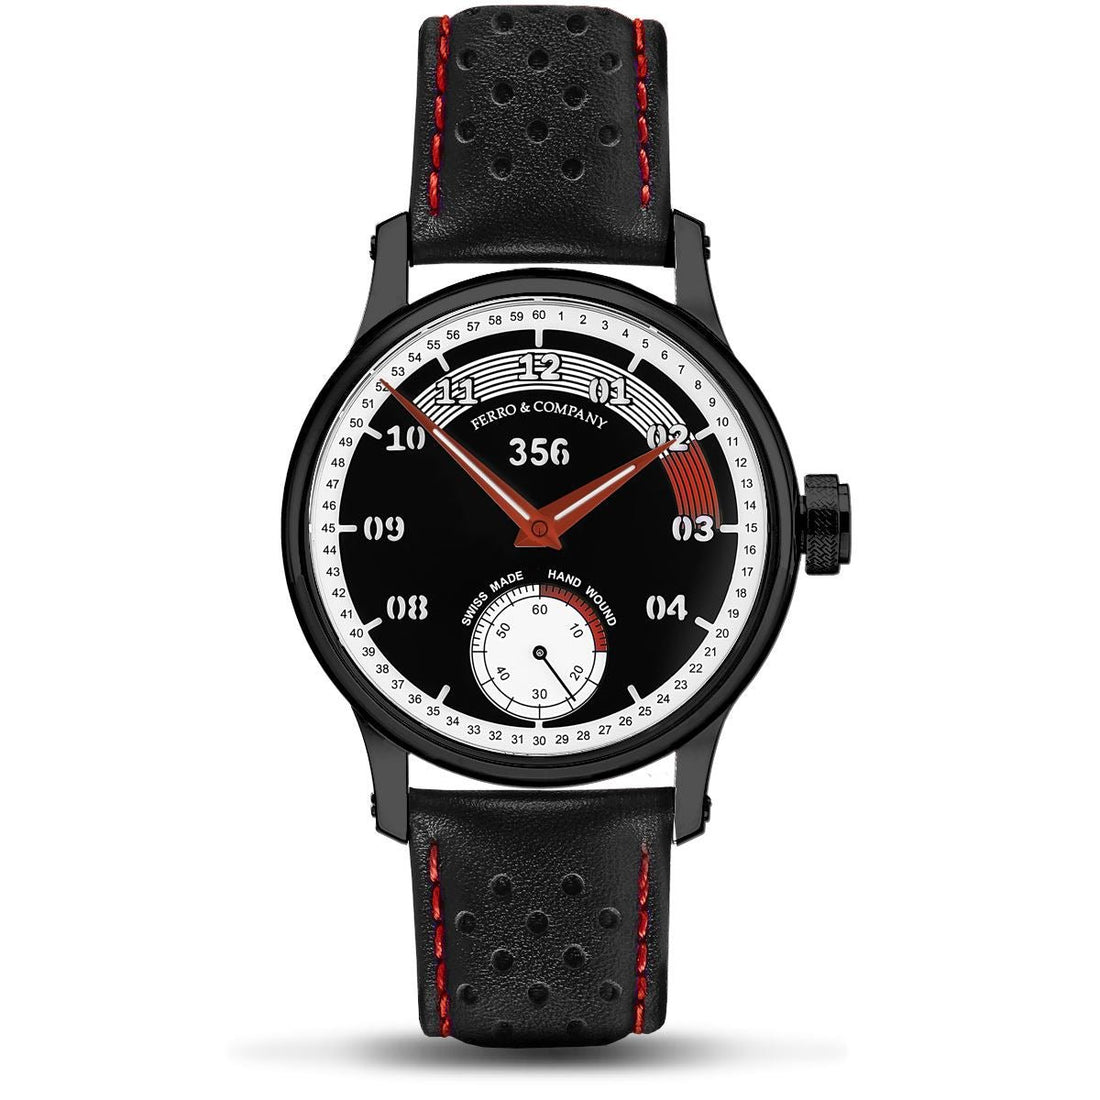 Ferro Watches 356 Vintage Style Race Watch Black / Red - Ferro & Company Watches